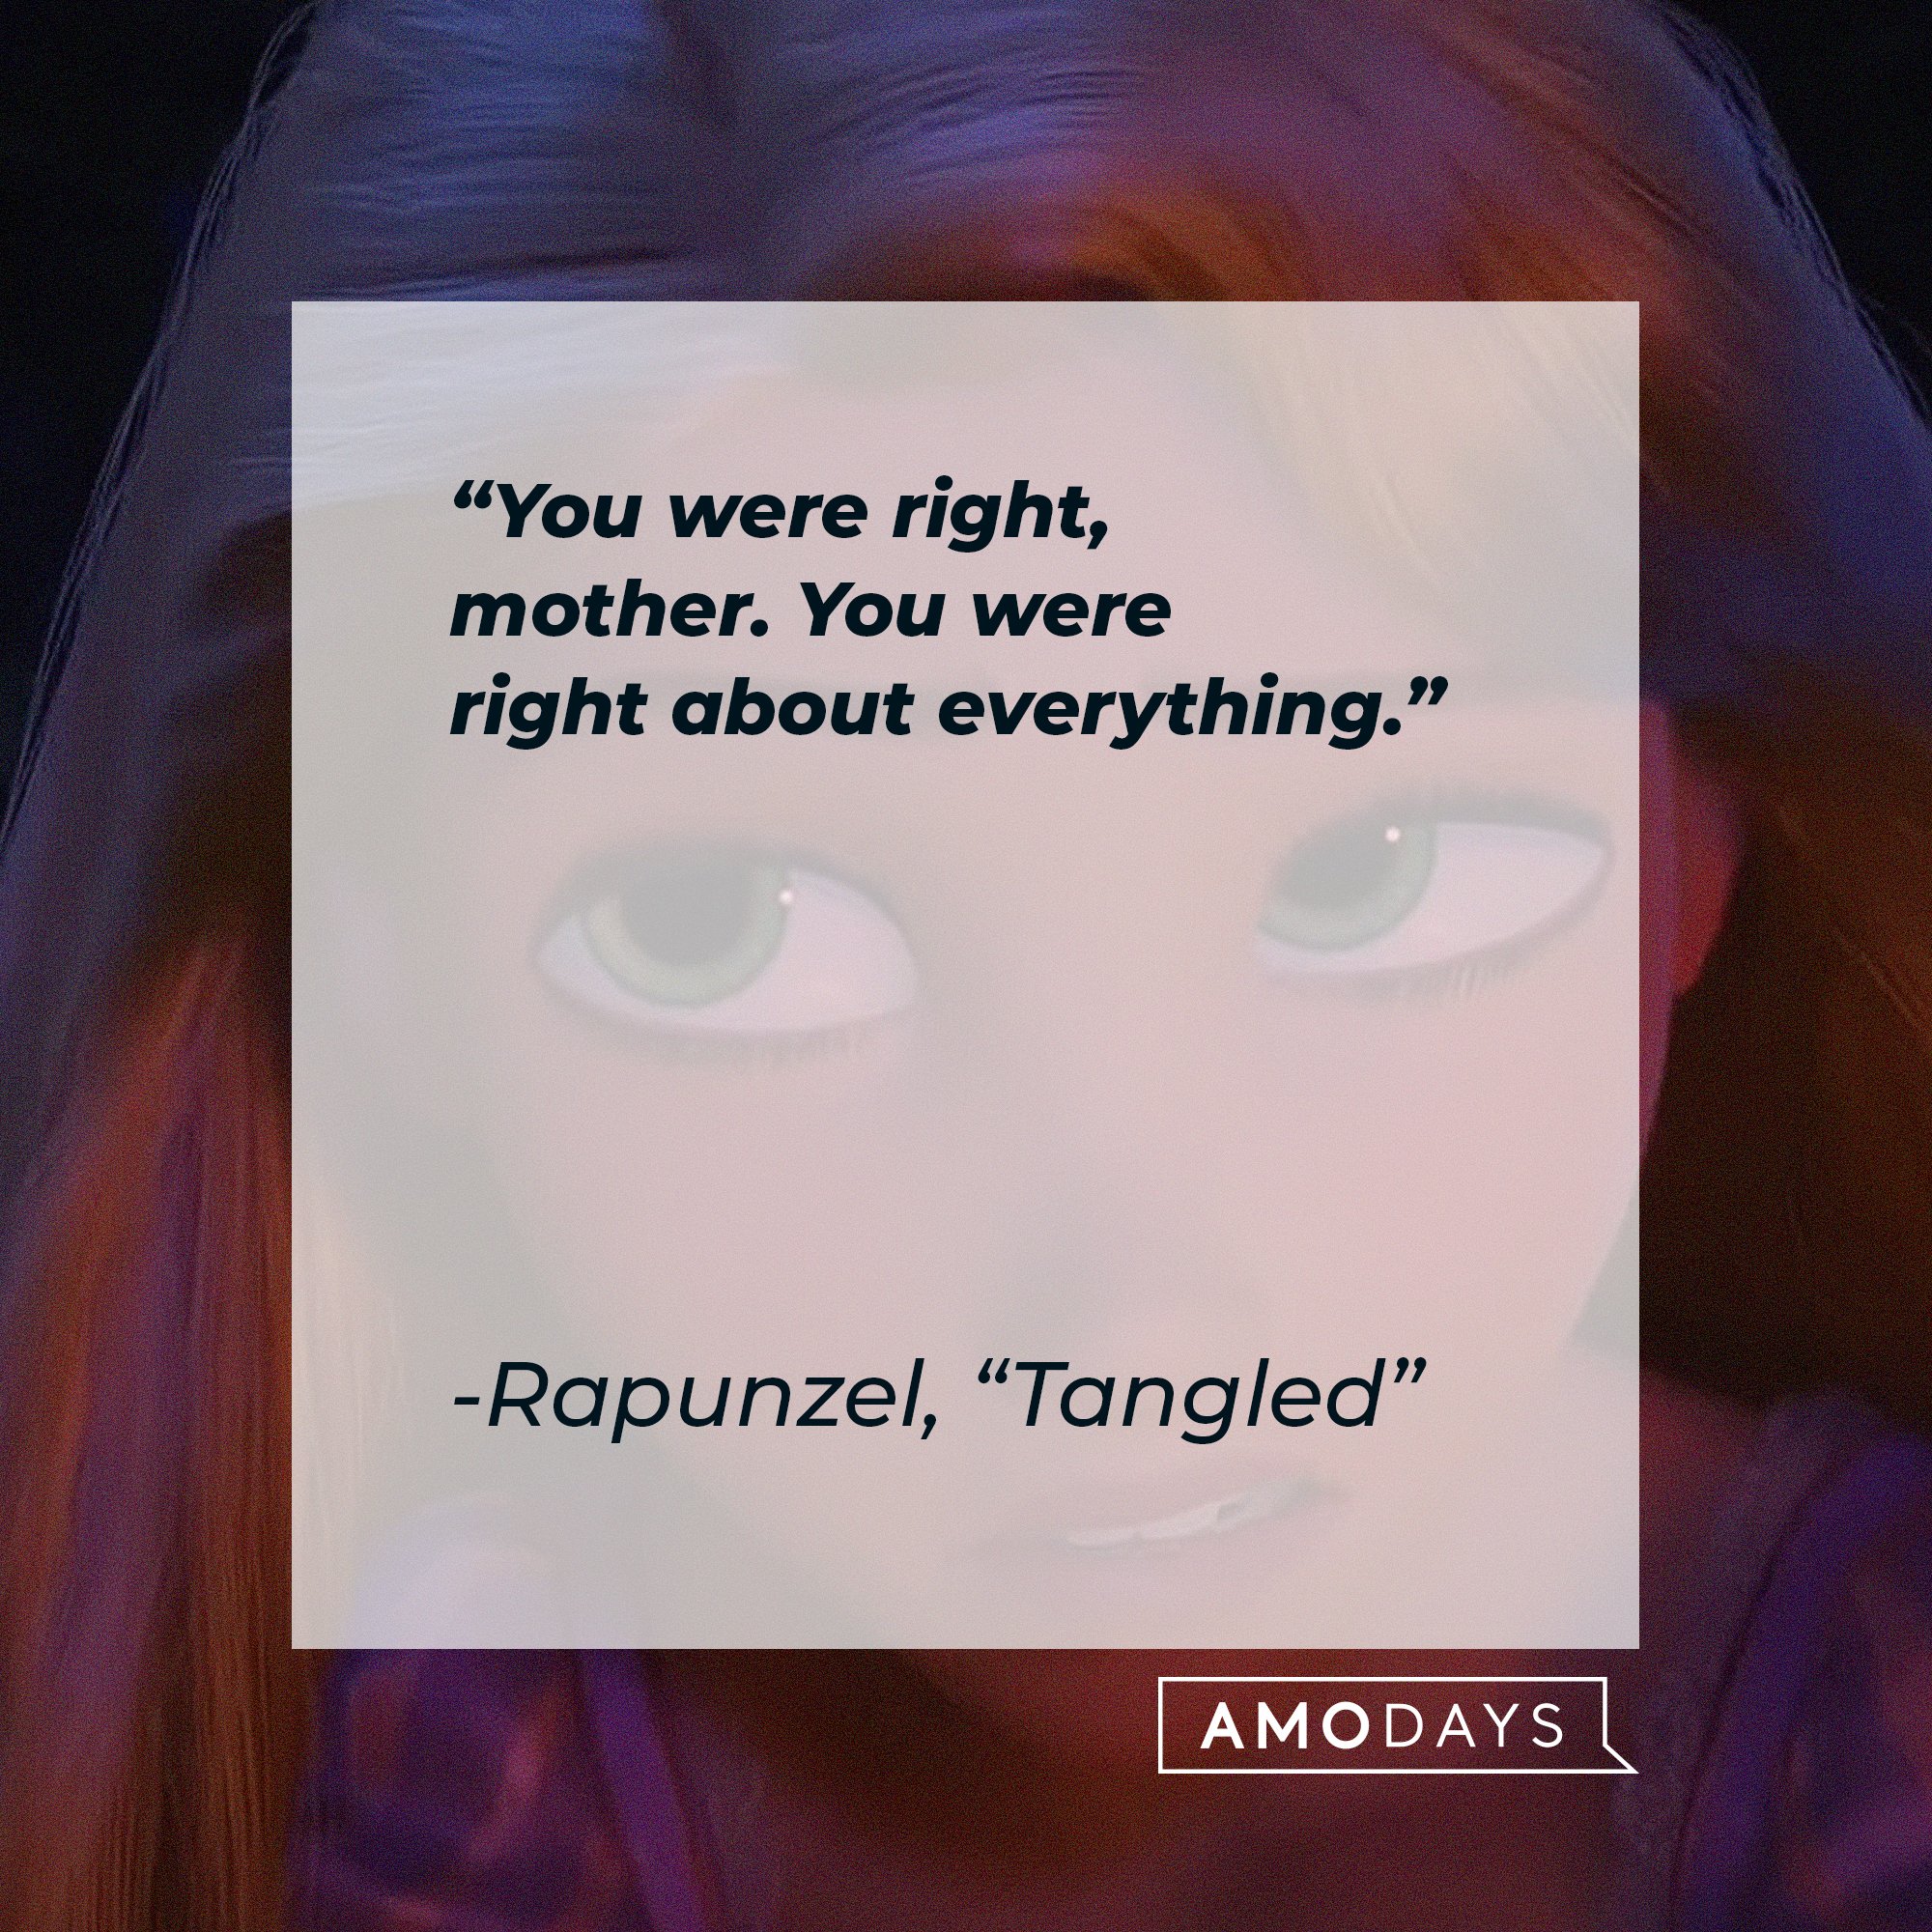 Rapunzel's "Tangled" quote: "You were right, mother. You were right about everything." | Image: AmoDays